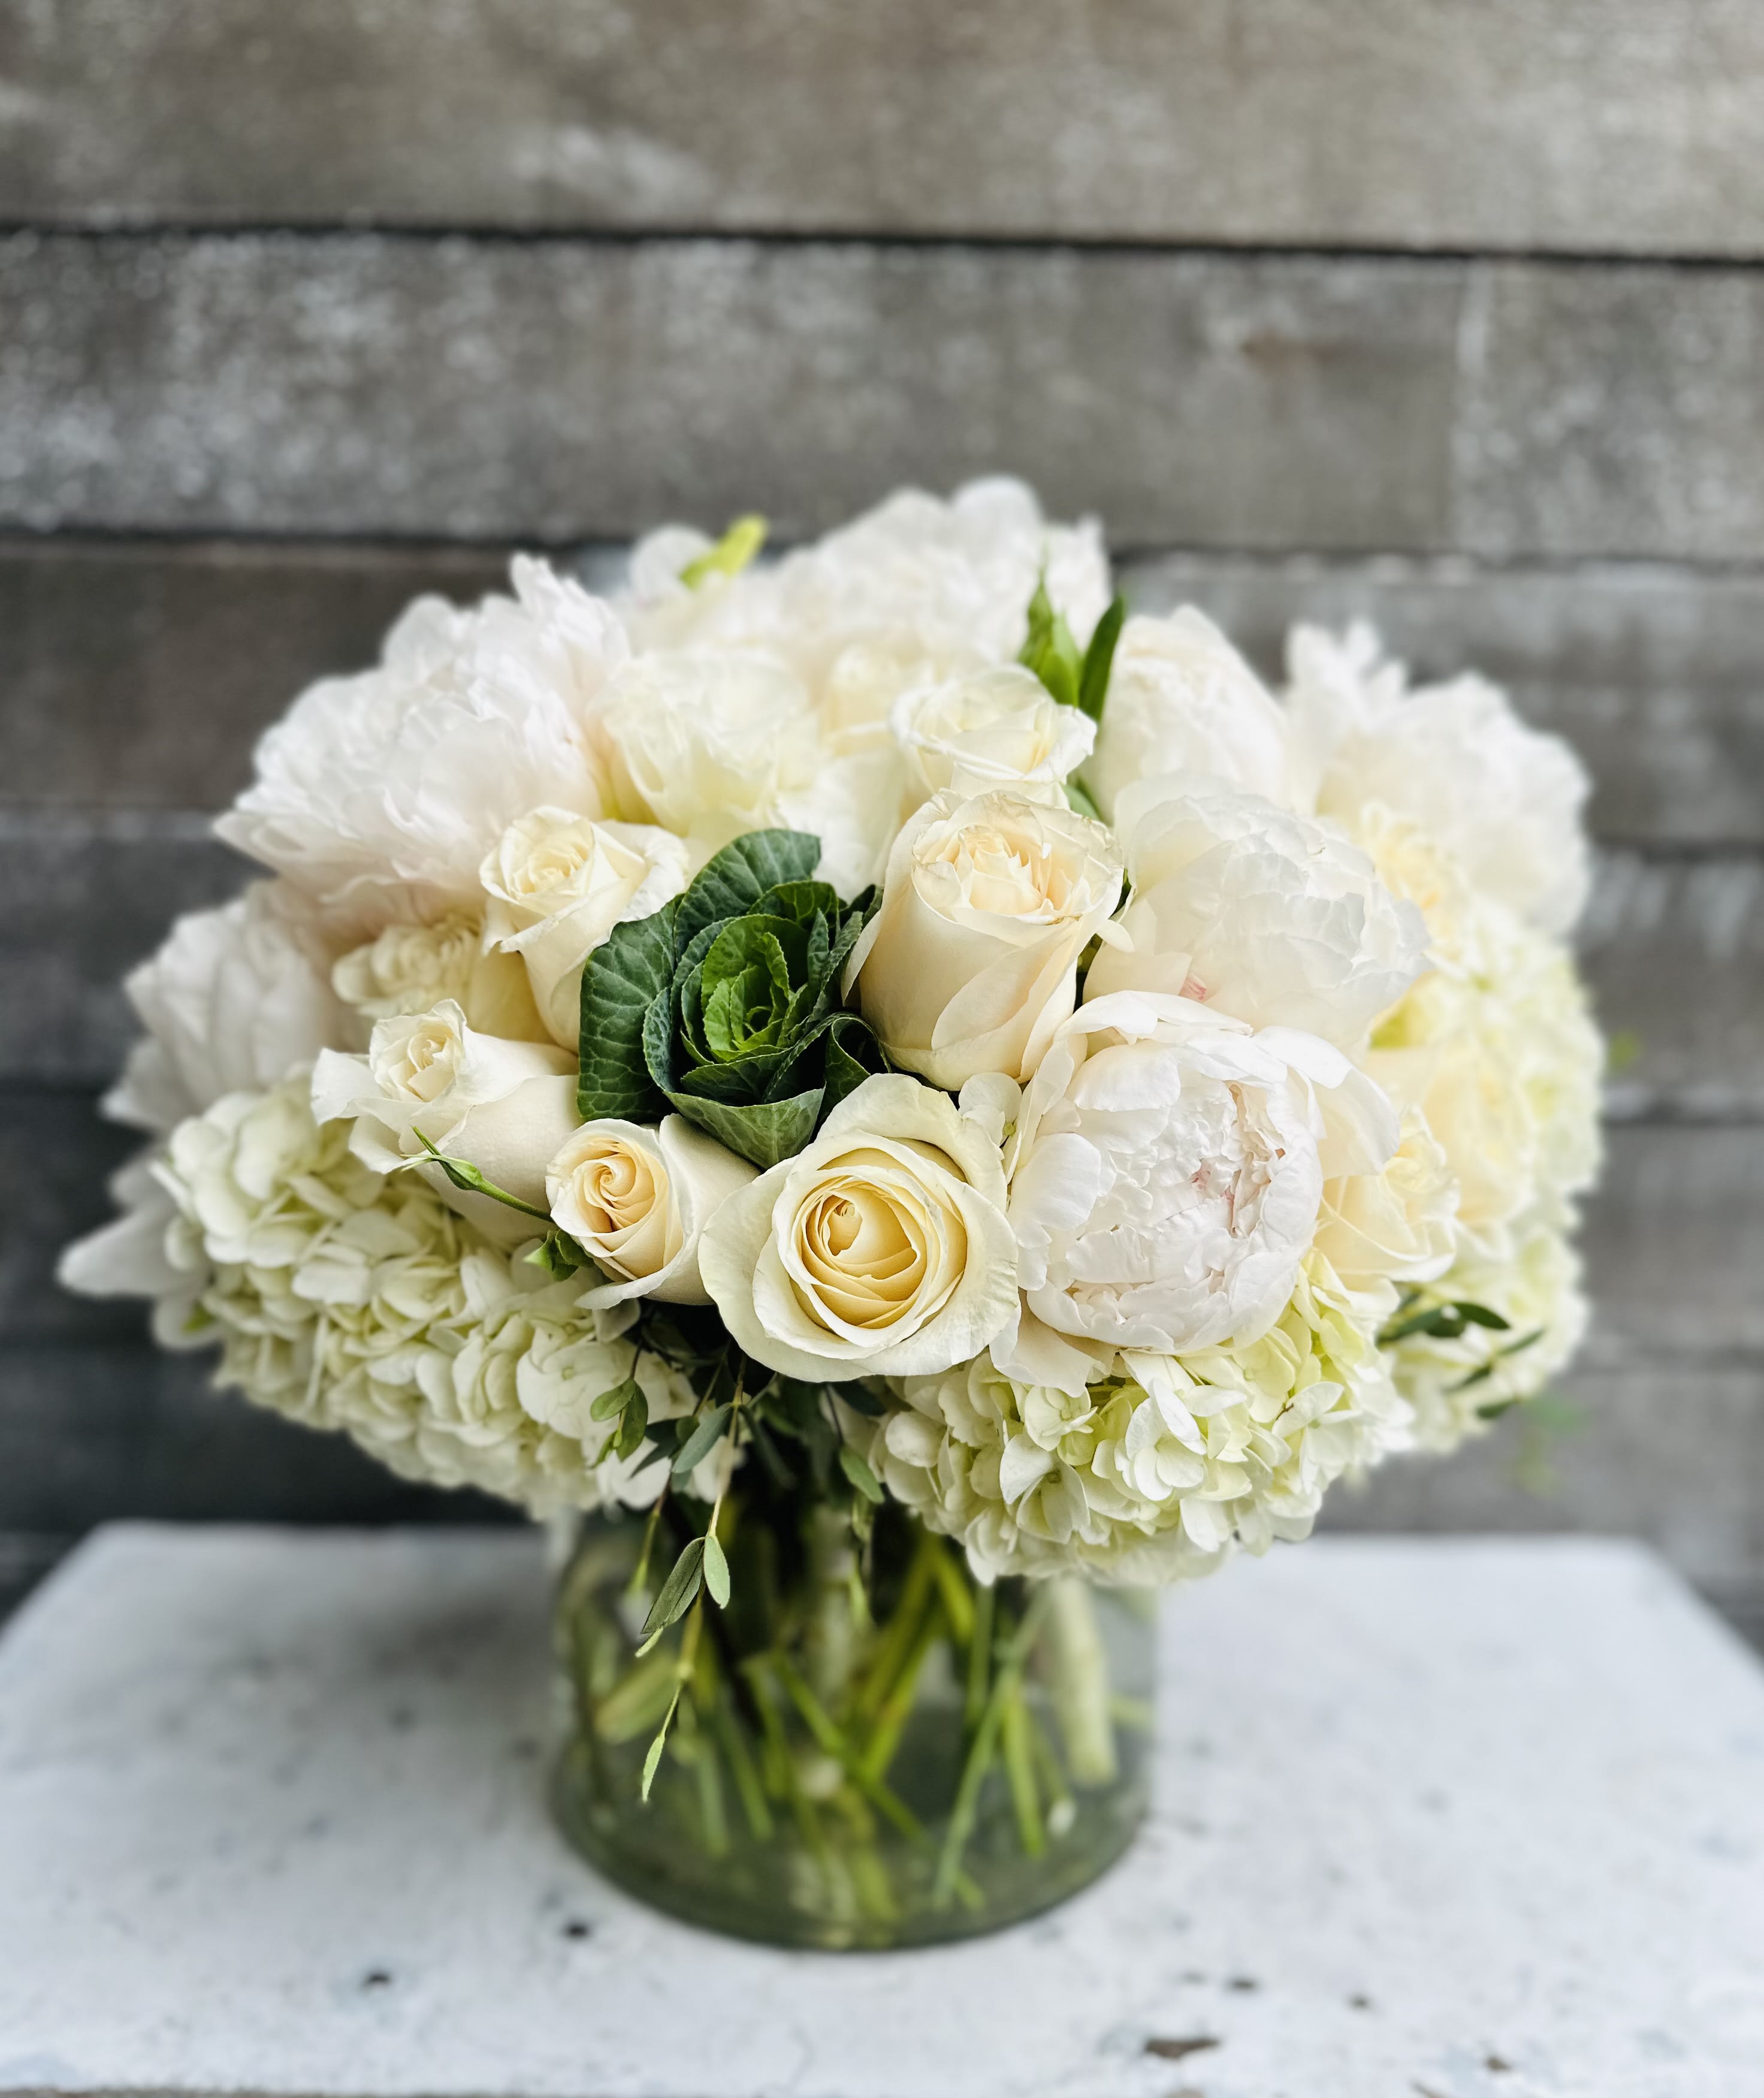 White peony elegance - Whites and creams with a slight touch of clean green gorgeous vibrant large peonies roses and hydrangea